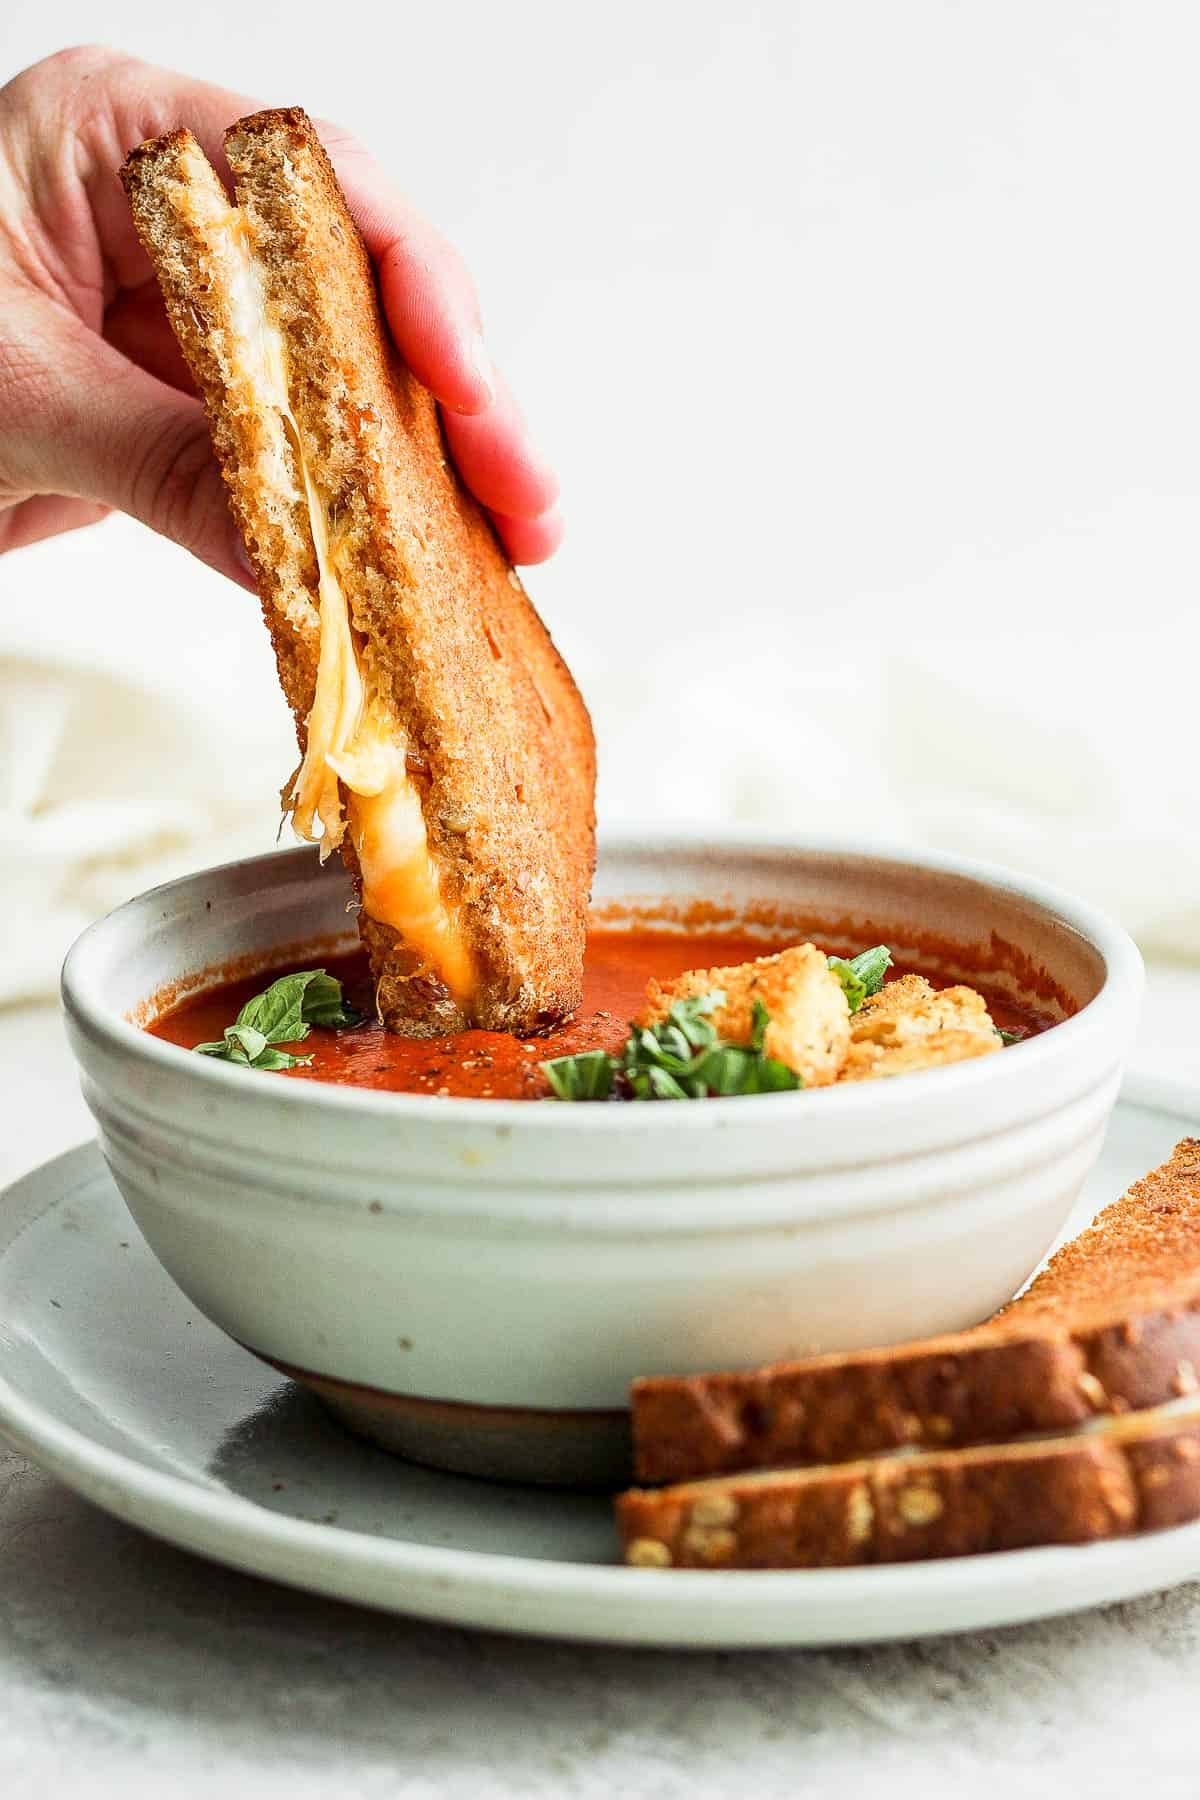 A grilled cheese being dipped in a bowl of tomato soup.